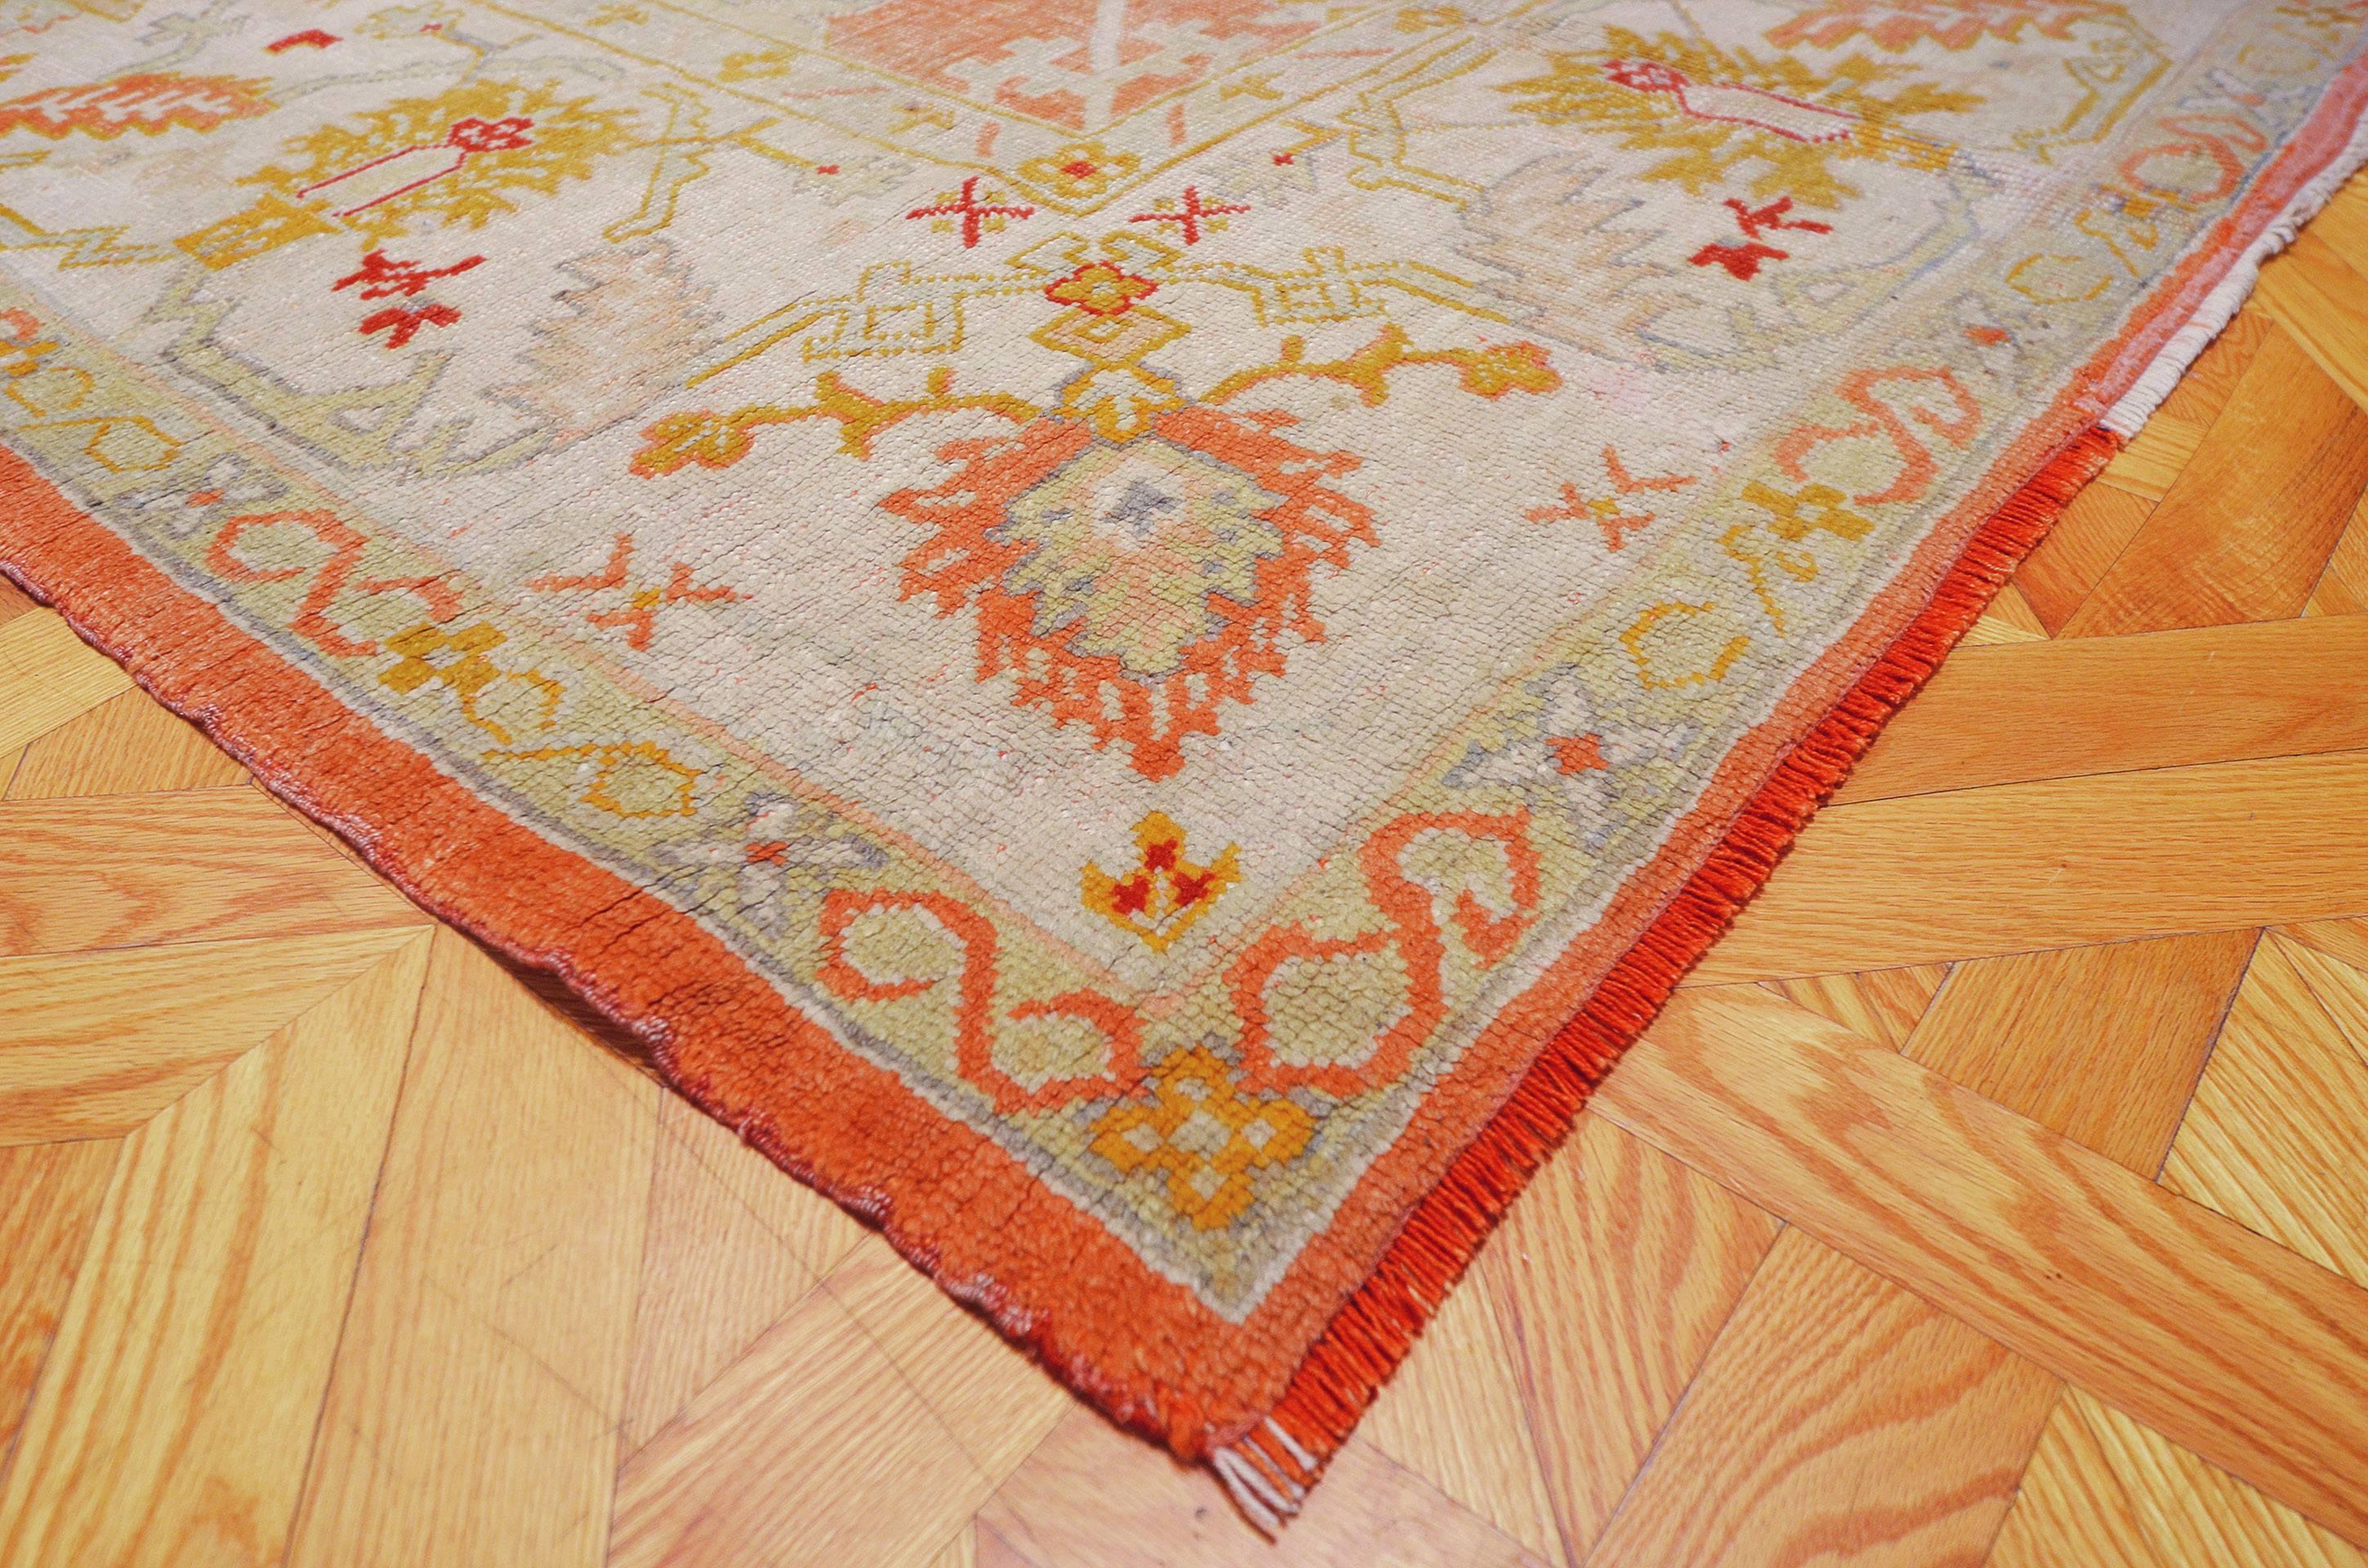 Late 19th Century Hand-Woven Oushak Wool Rug from West Anatolia In Good Condition For Sale In West Hollywood, CA